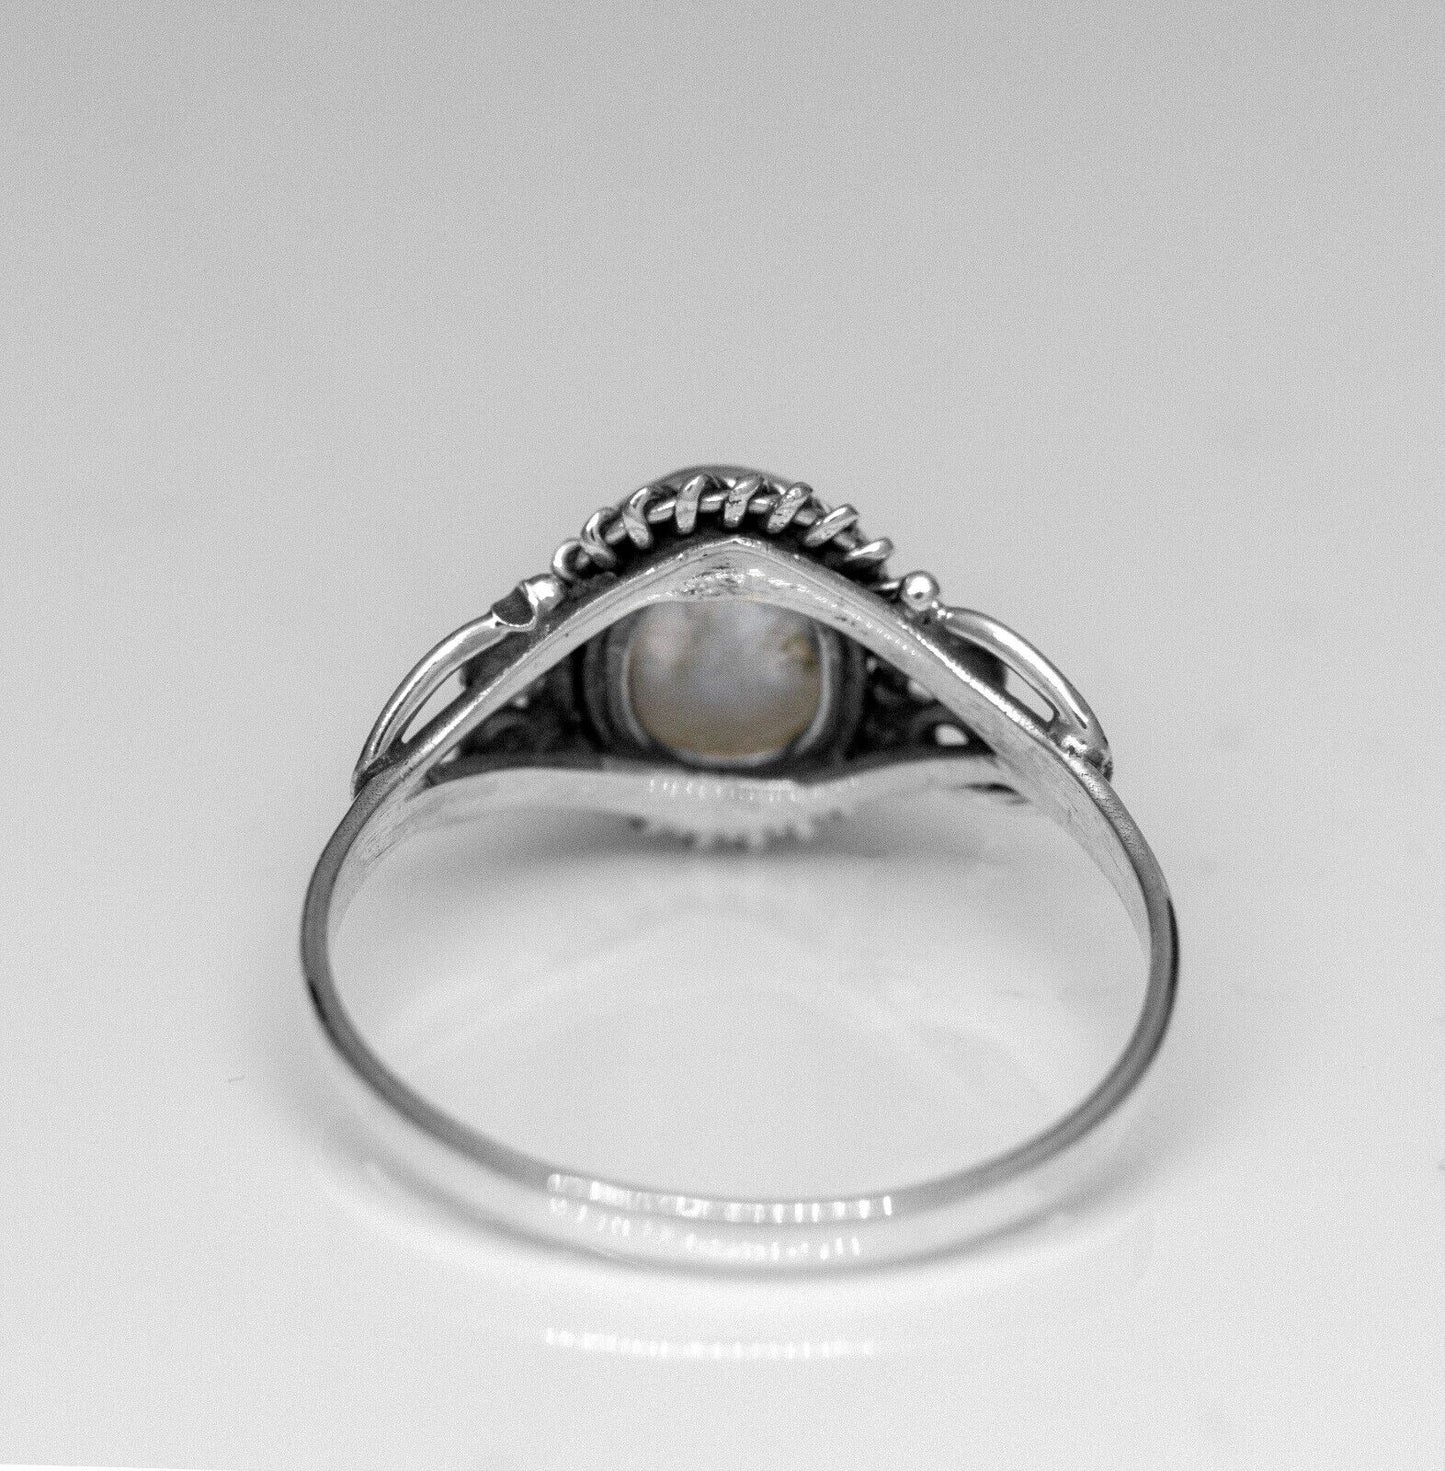 Oval Cabochon Moonstone 925 Sterling Silver Ladies Gemstone Ring Boxed Jewelry